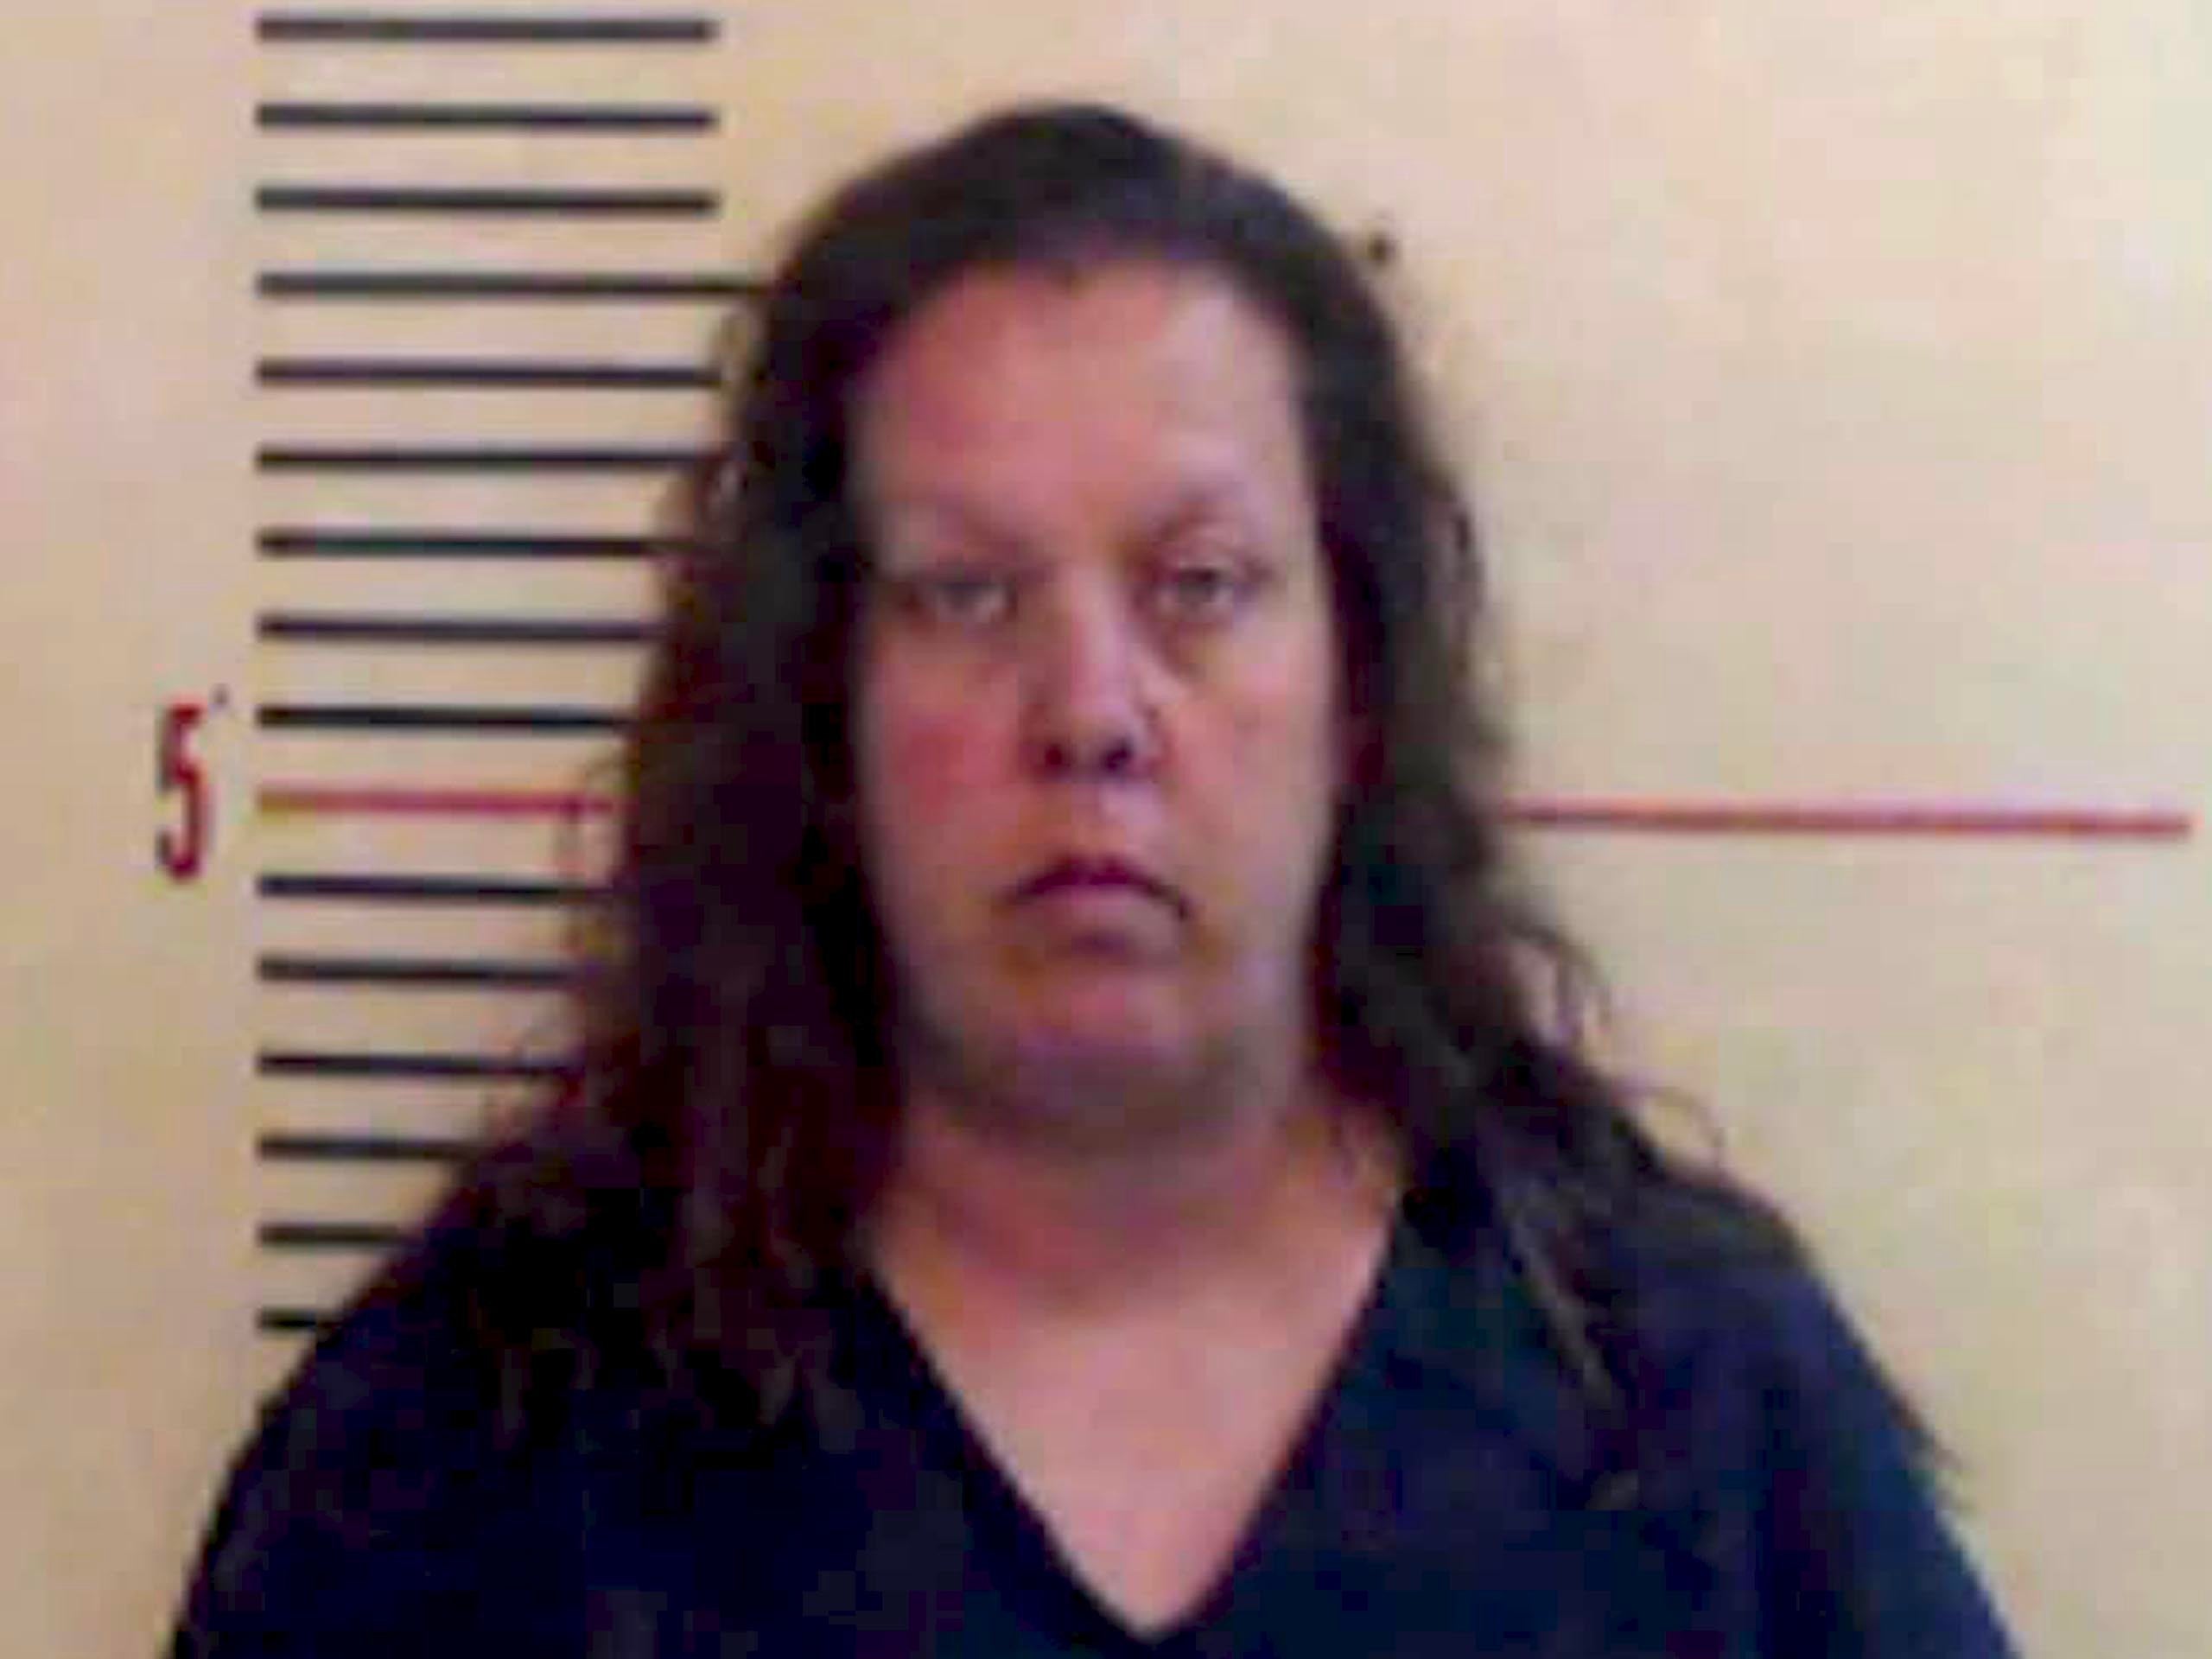 Misty Lorene Cato, 43, was arrested for an improper relationship with a student